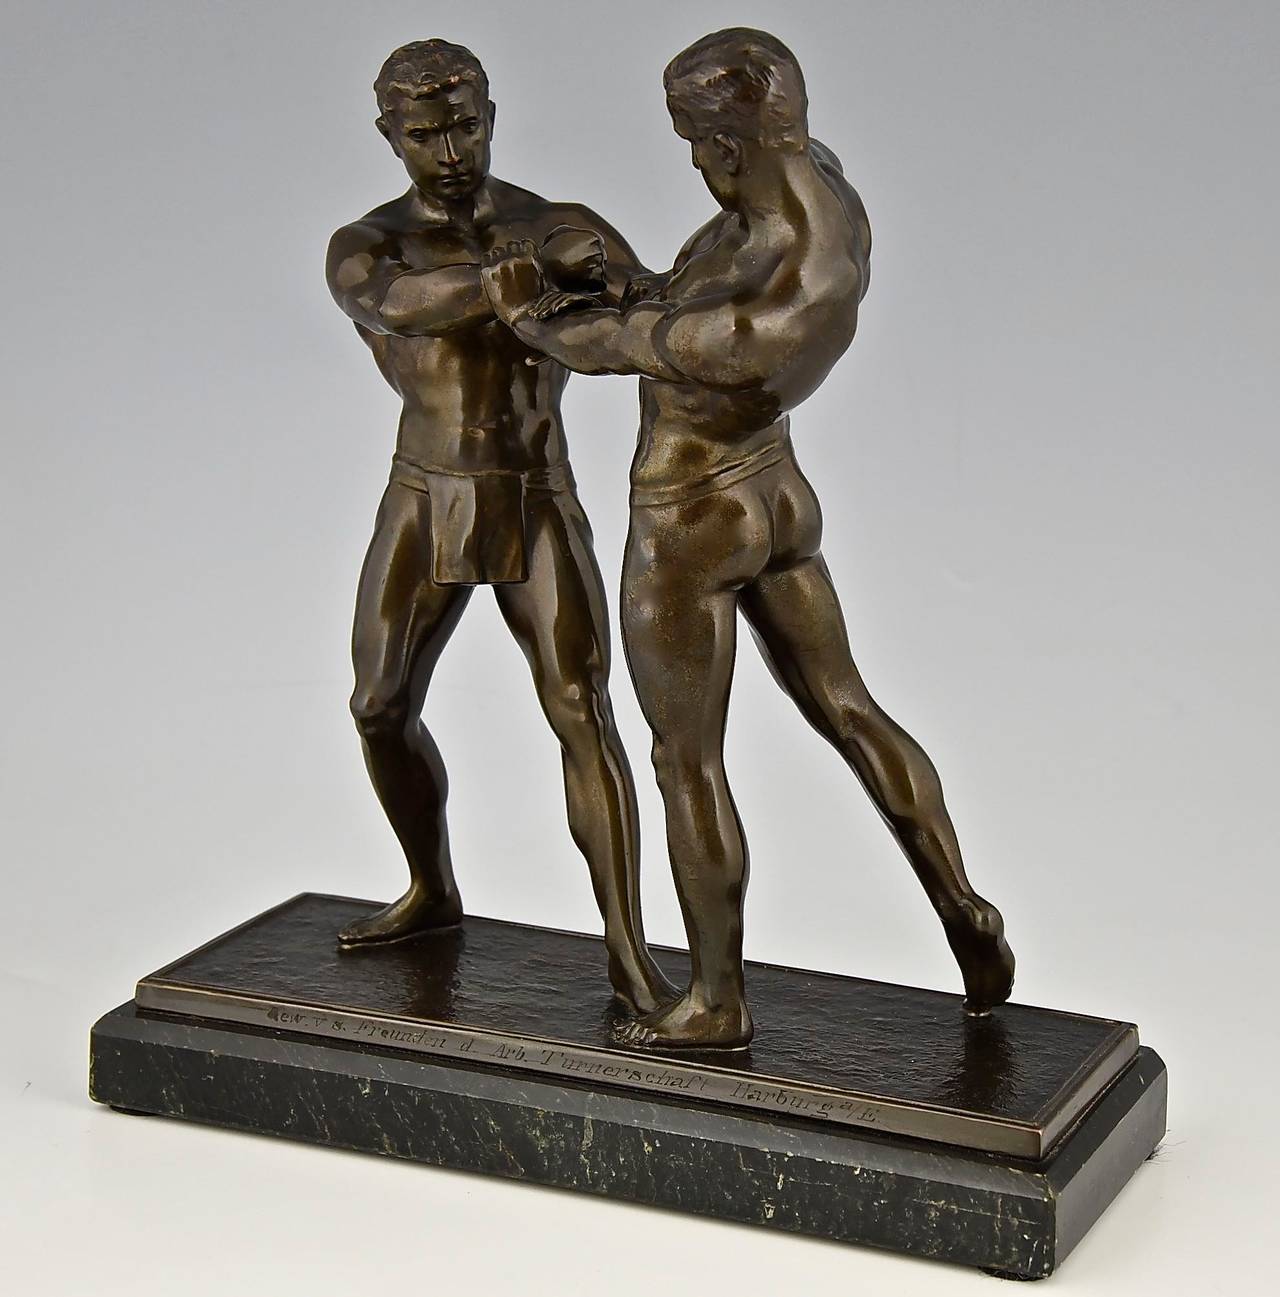 Romantic Antique Sculpture of Two Wrestlers, Germany 1910